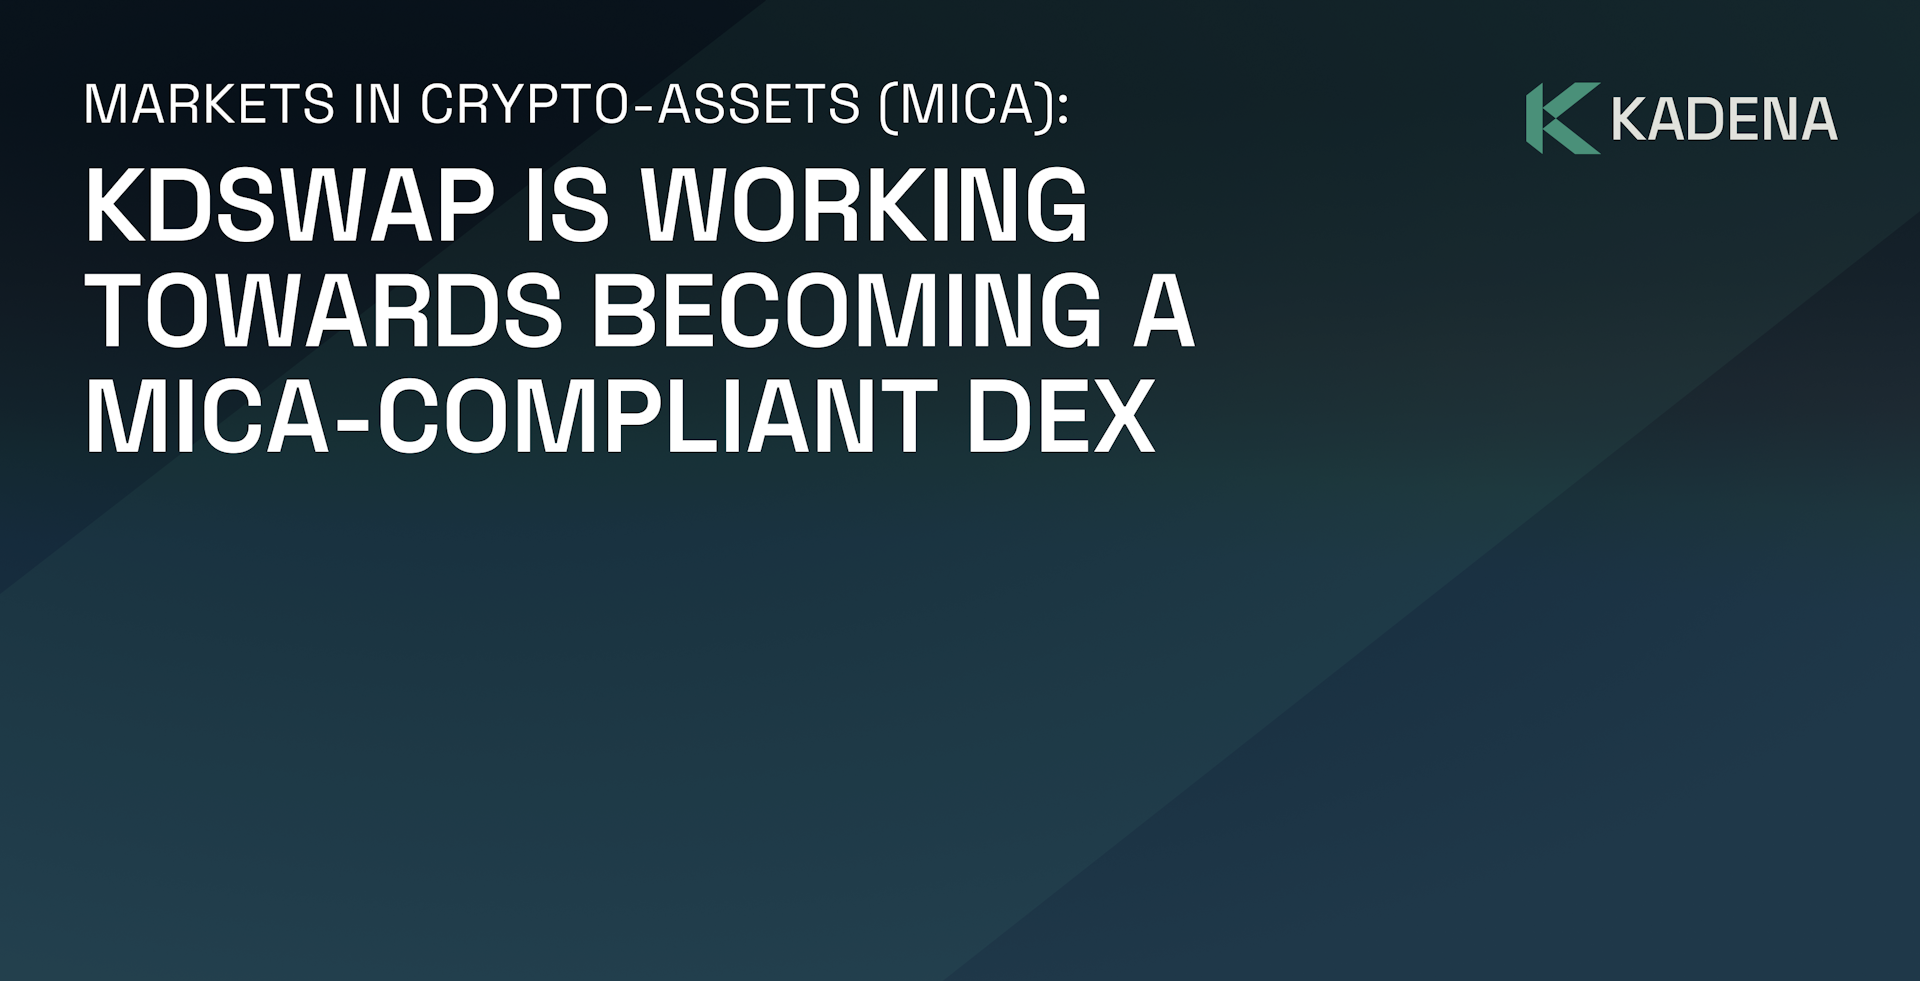 Markets in Crypto-Assets (MiCA): KDSwap is Working Towards Becoming a MiCA-Compliant DEX